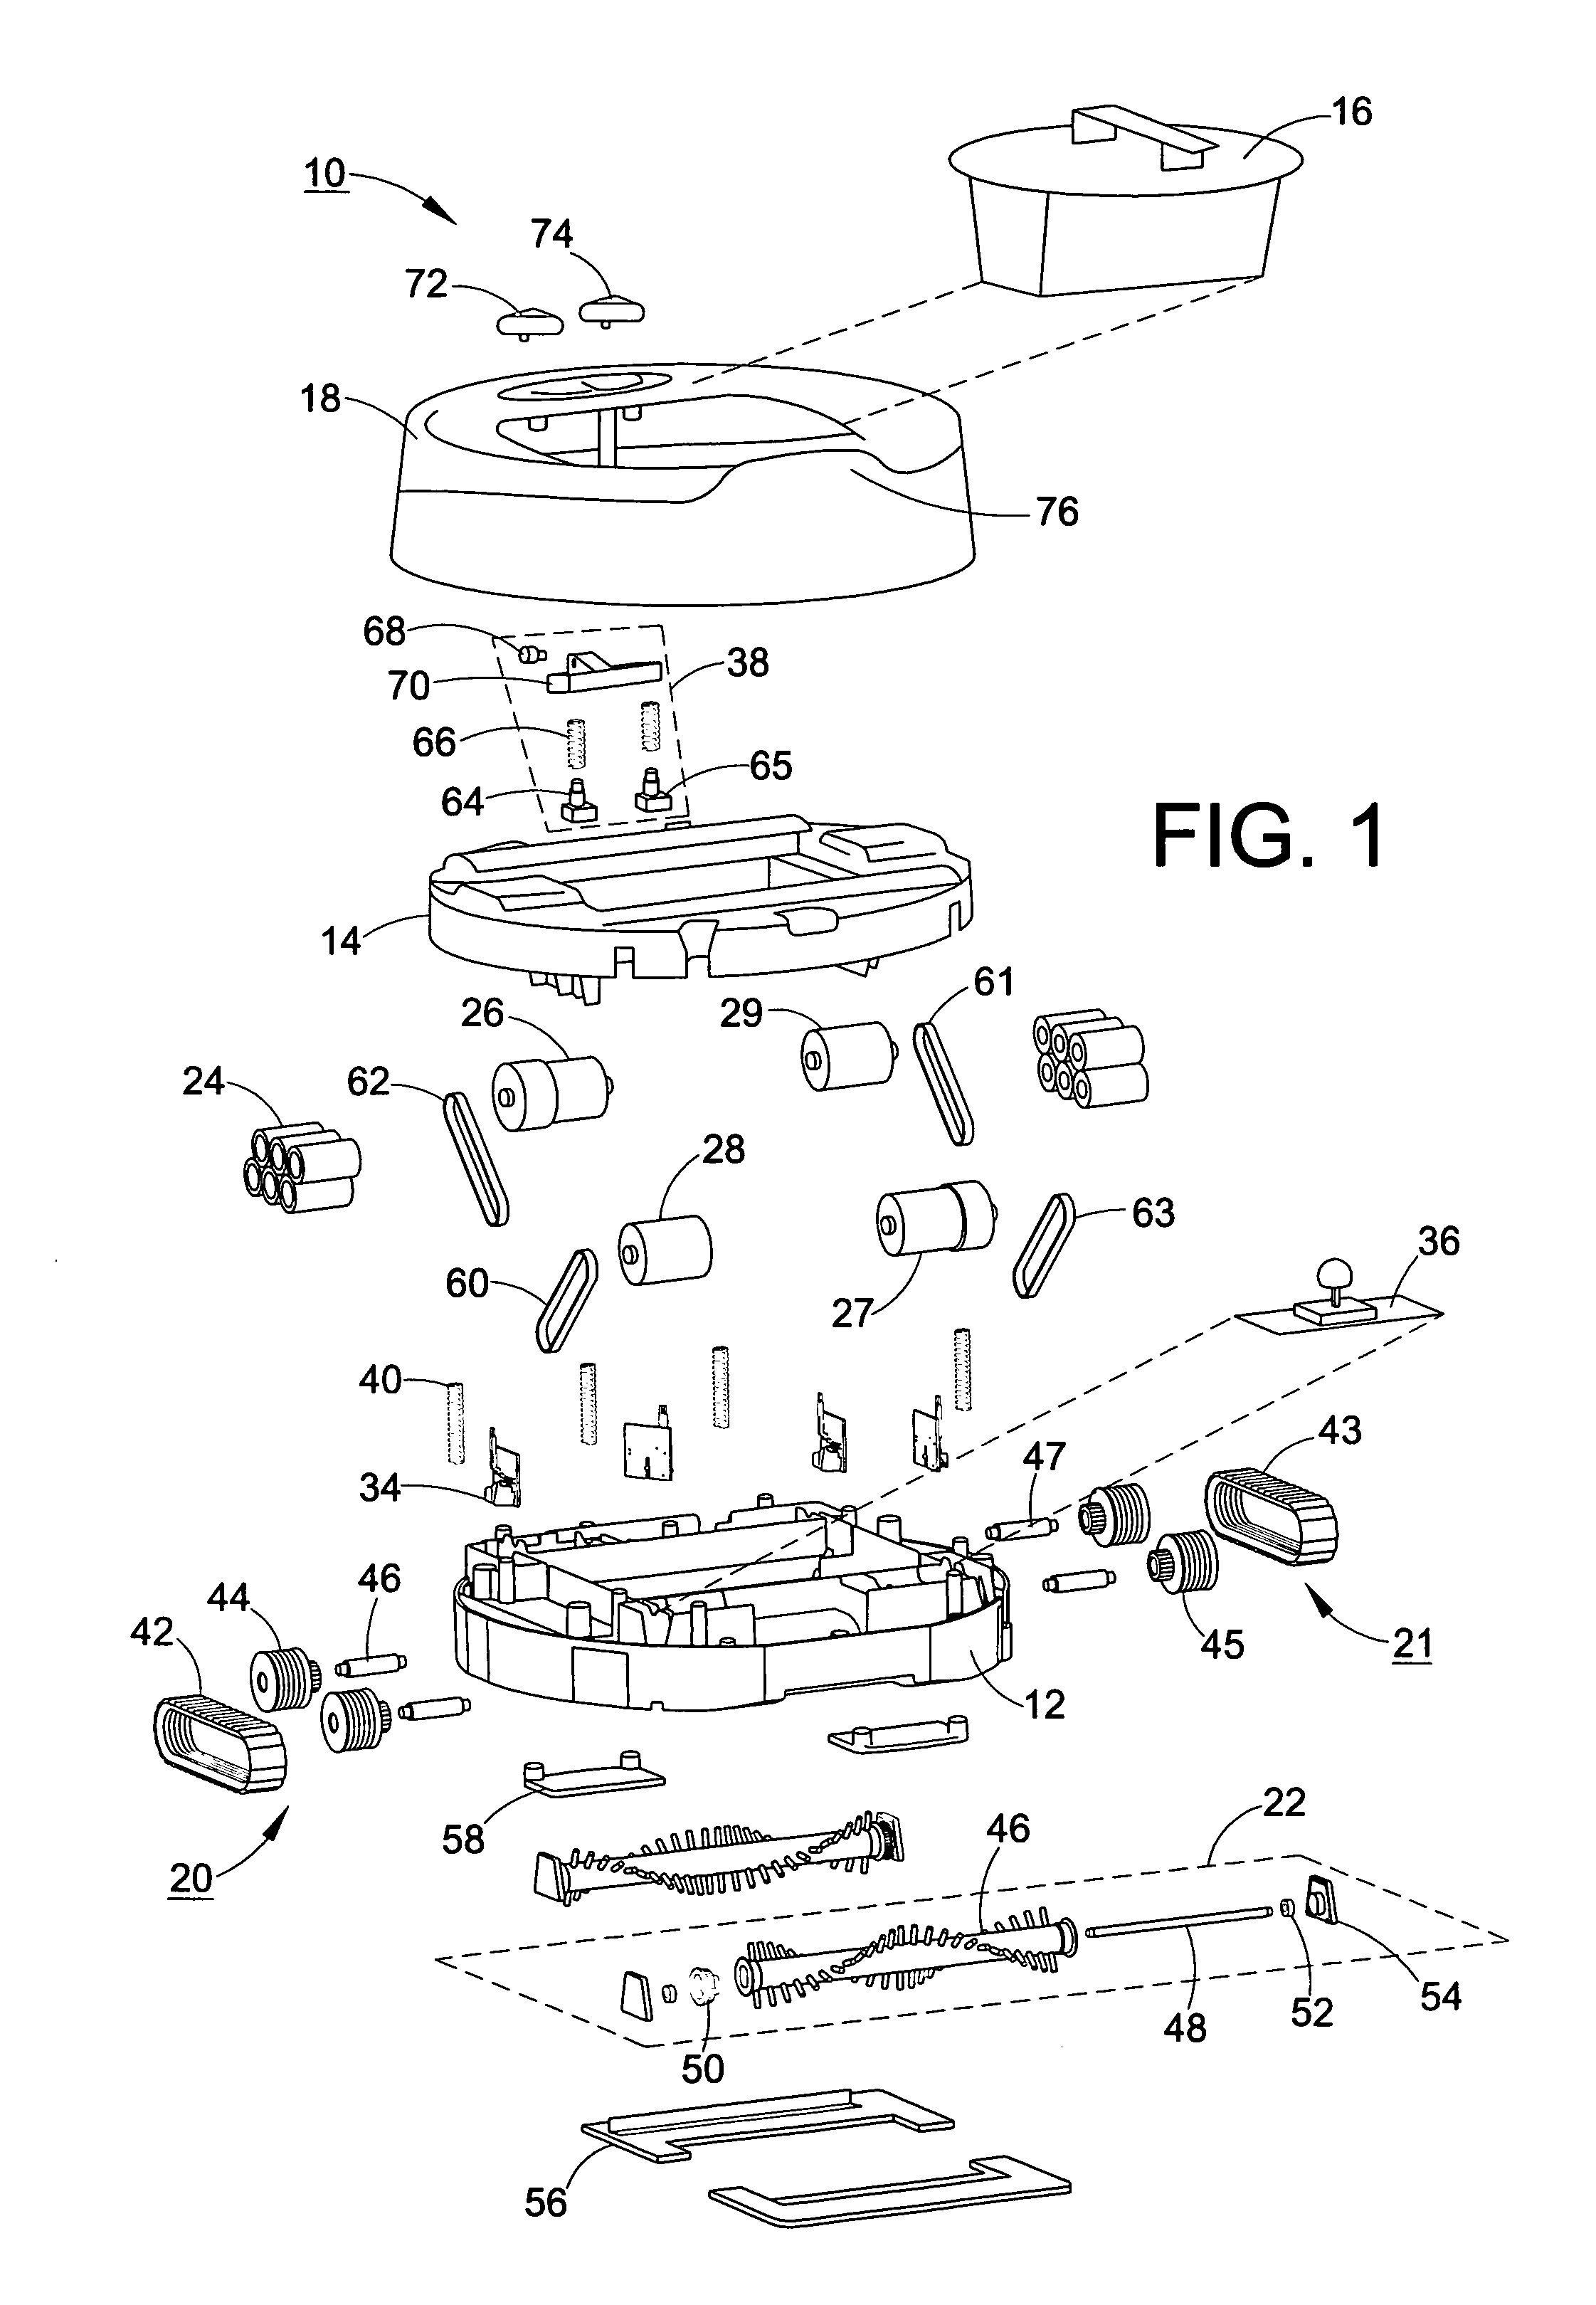 Robotic appliance with on-board joystick sensor and associated methods of operation